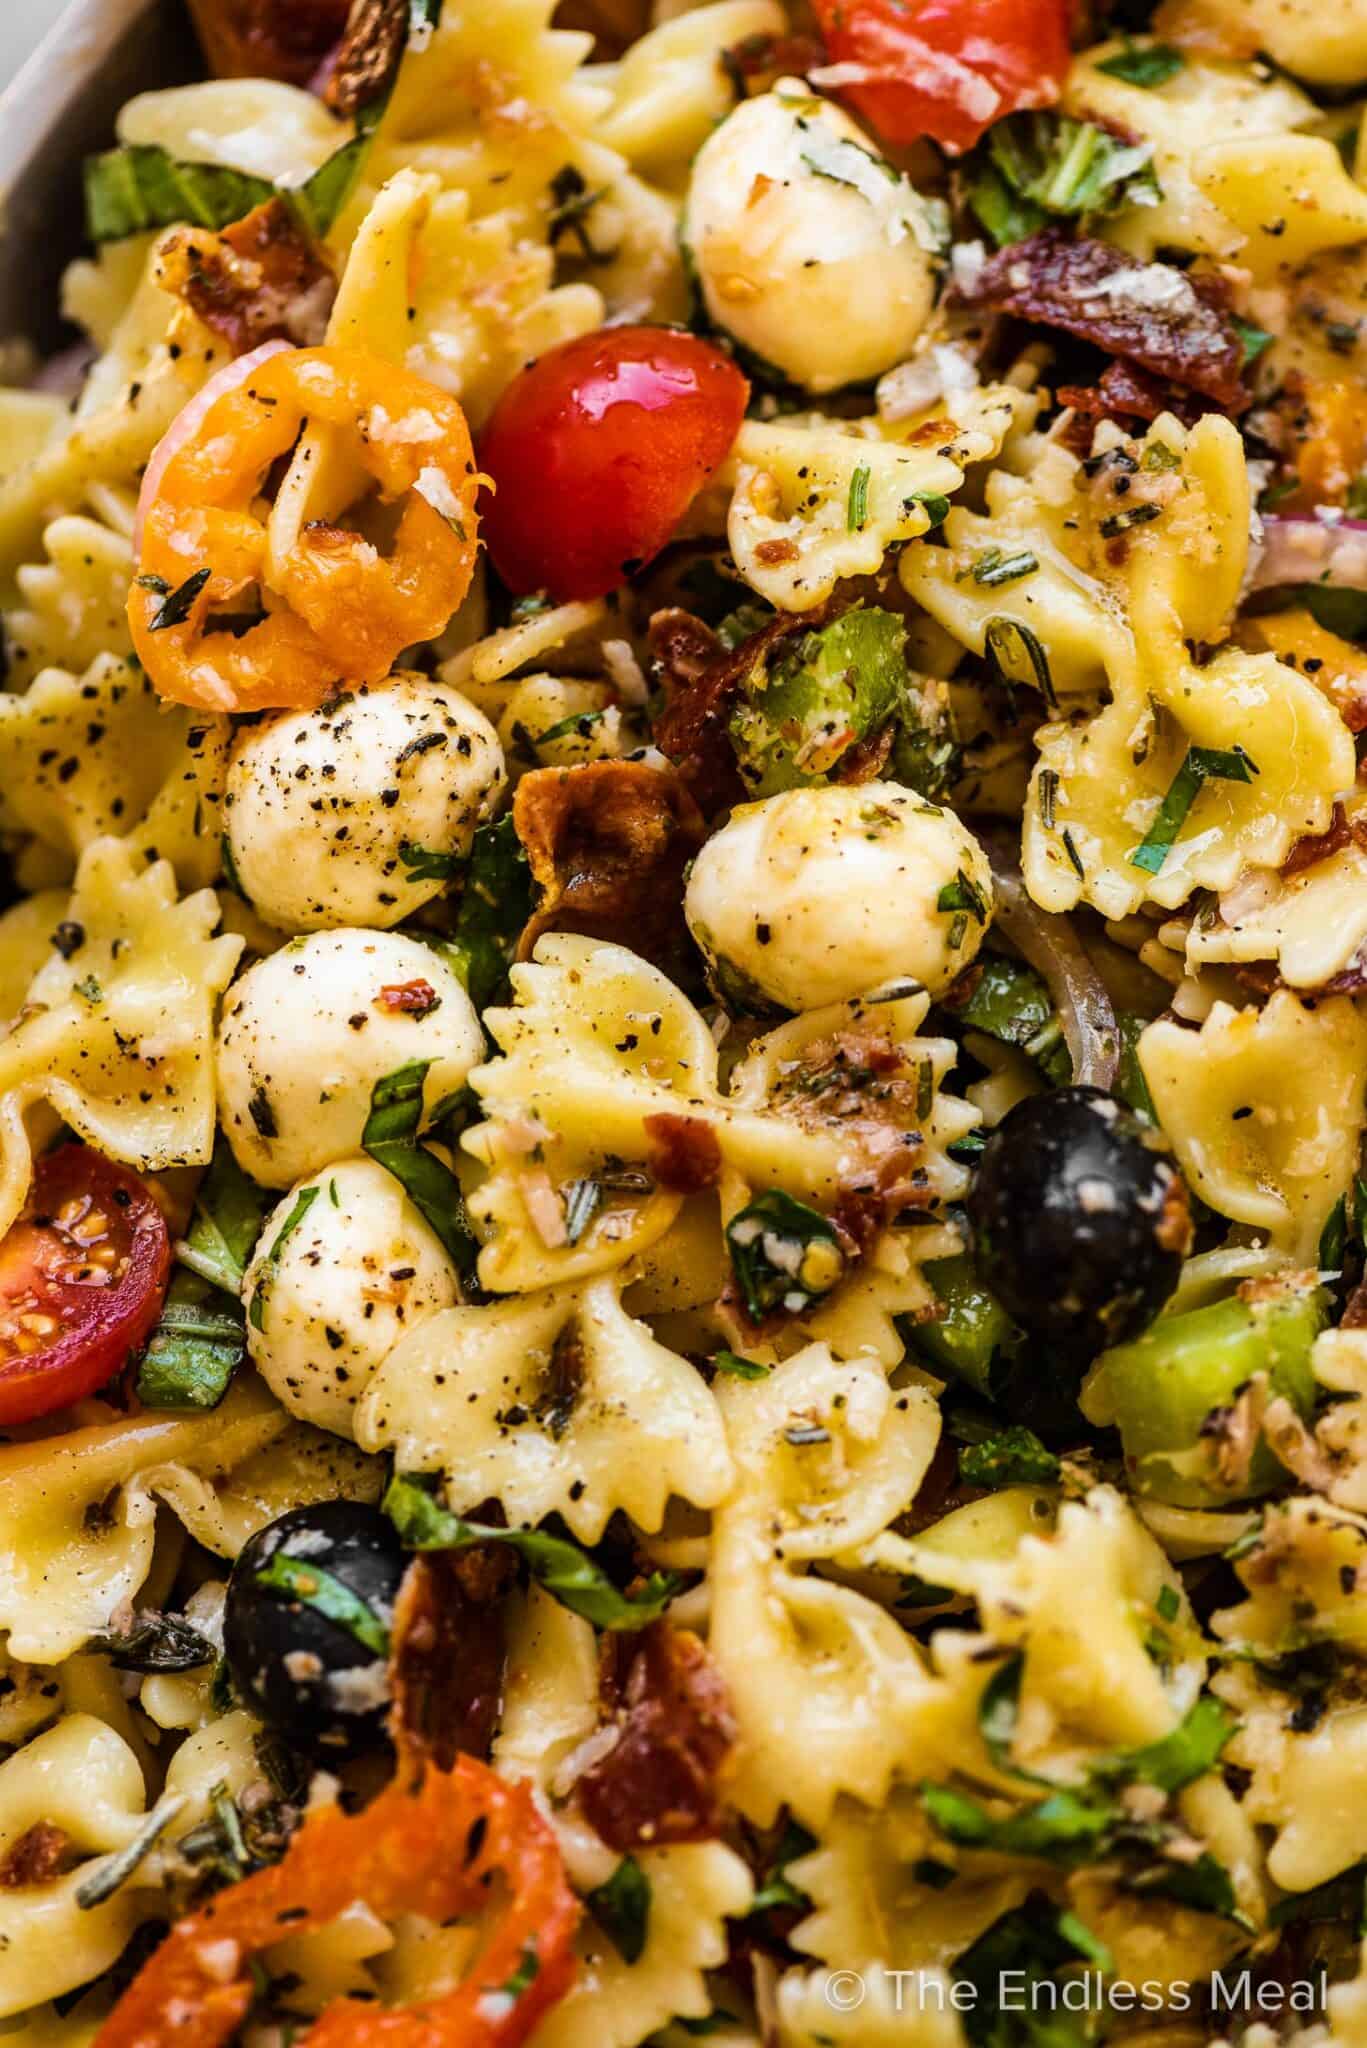 A close up of Pasta Salad with Italian Dressing.